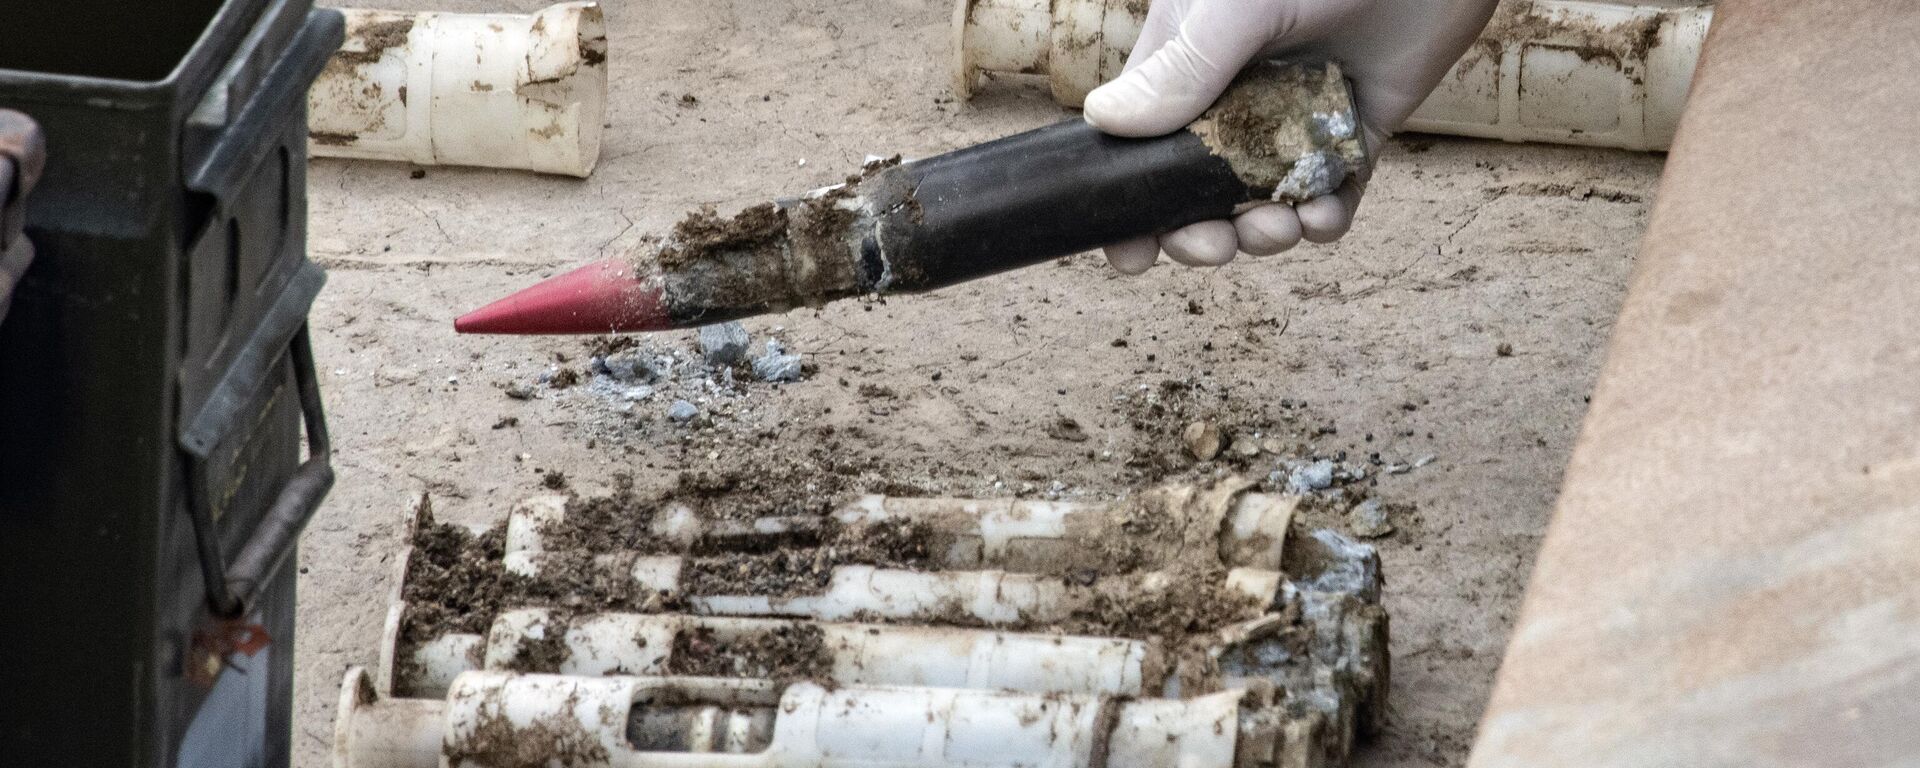 In this image provided by the U.S. Air National Guard, U.S. Air Force National Guard Explosive Ordnance Disposal Techinicians prepare several contaminated and compromised depleted uranium rounds on June 23, 2022 at Tooele Army Depot, Utah - Sputnik Africa, 1920, 06.09.2023